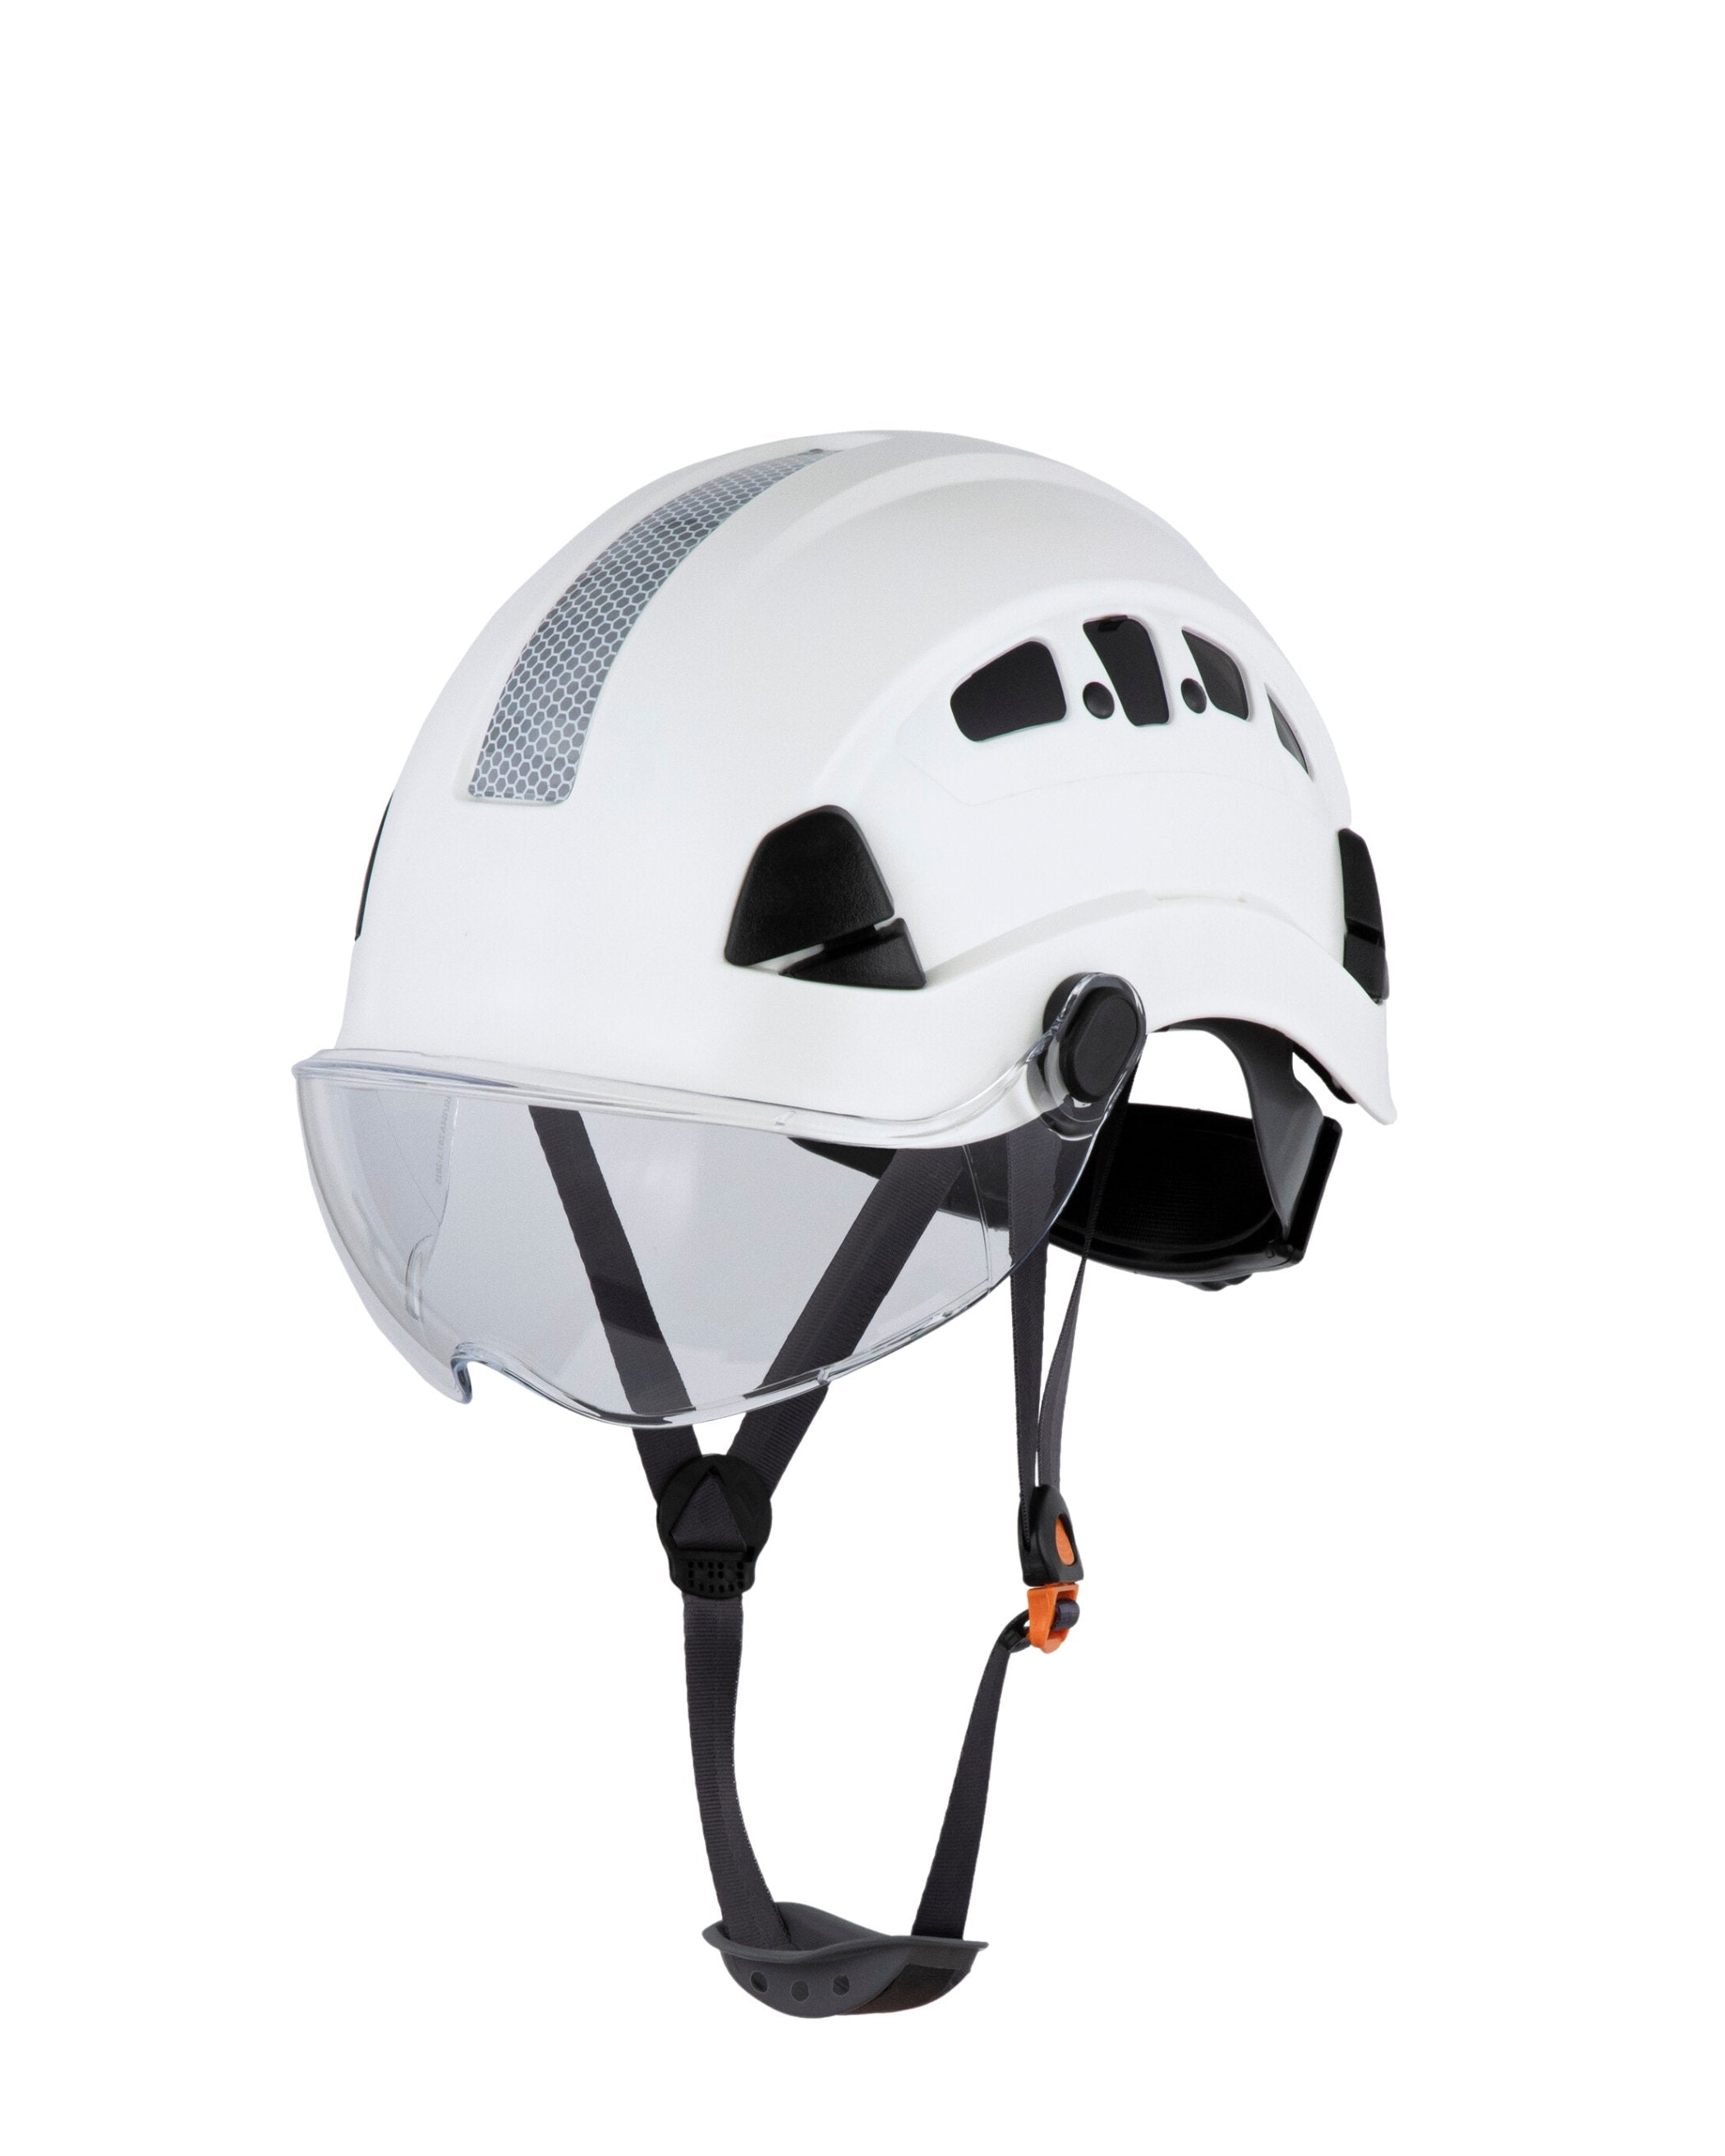 H1-CH Safety Helmet With Visor, Type 1 Class C, ANSI Z89.1